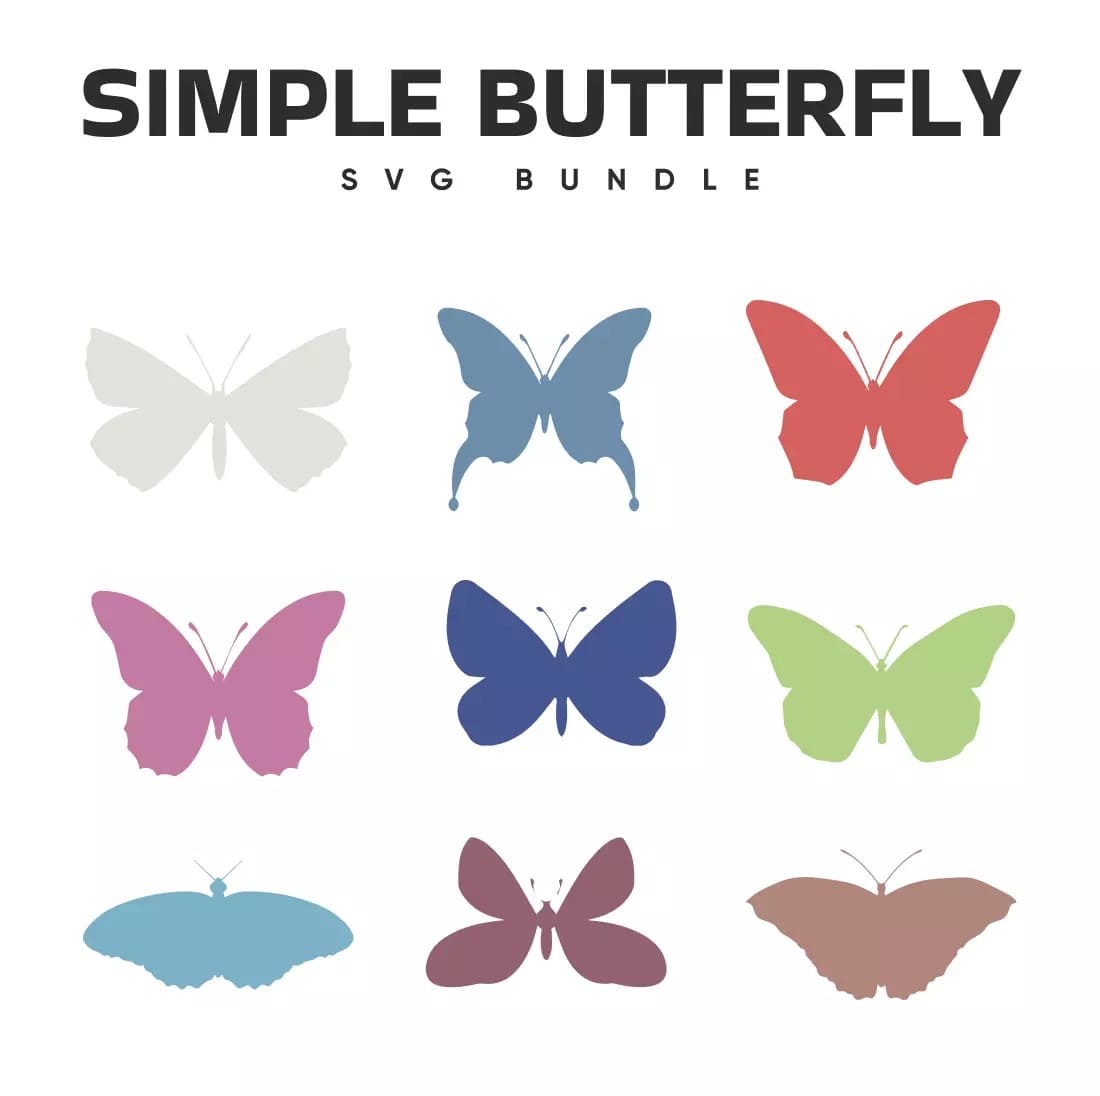 The simple butterfly svg bundle.